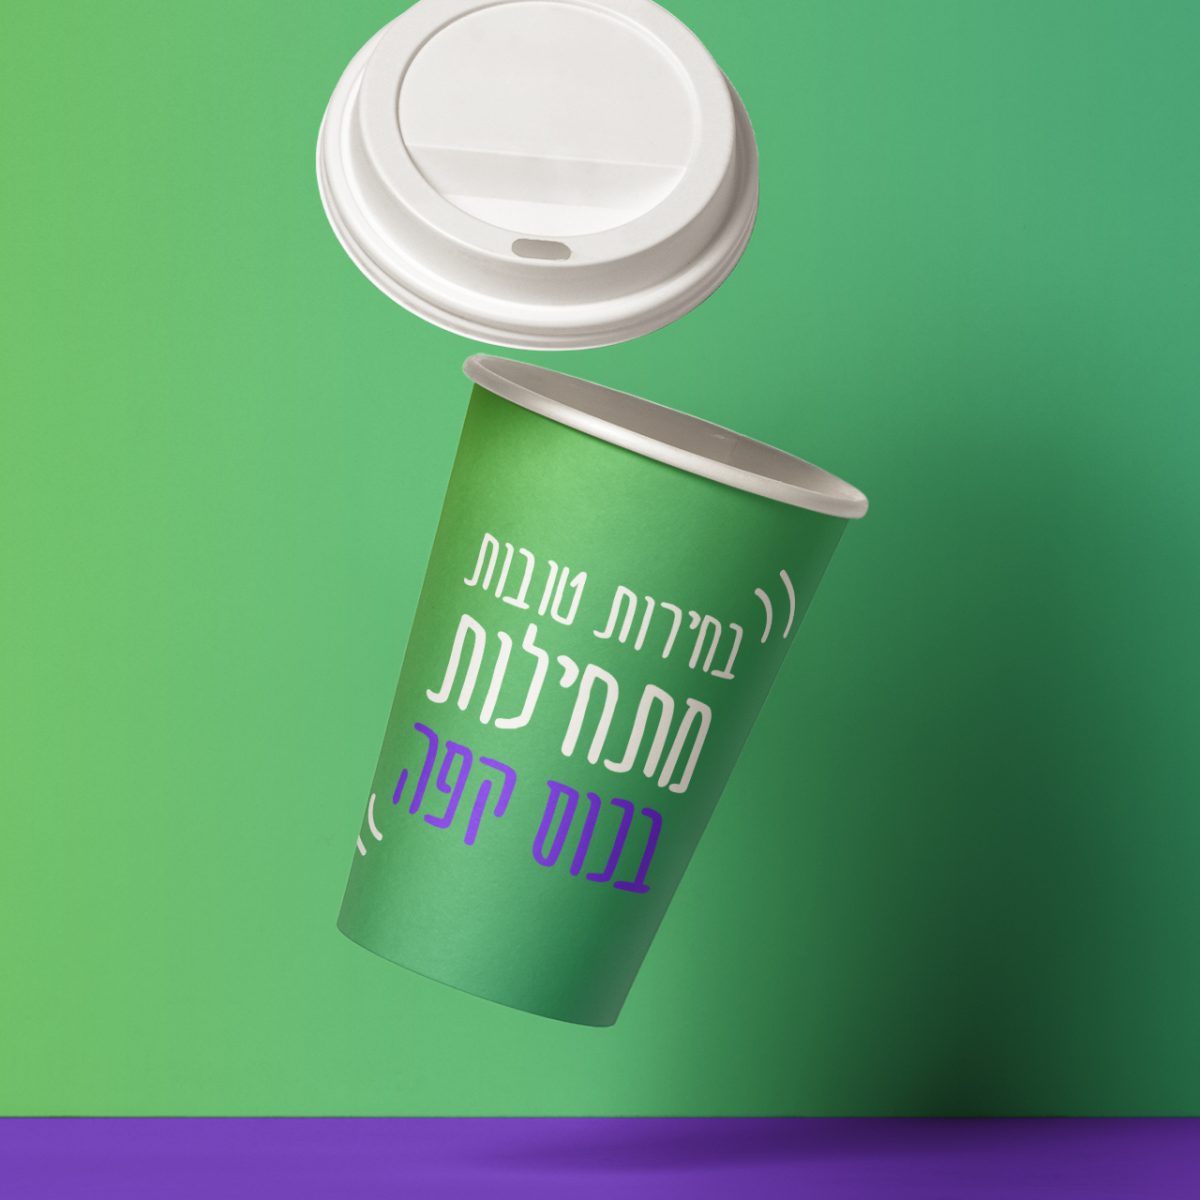 Gravity-Paper-Hot-Cup-Mockup_1440x1280